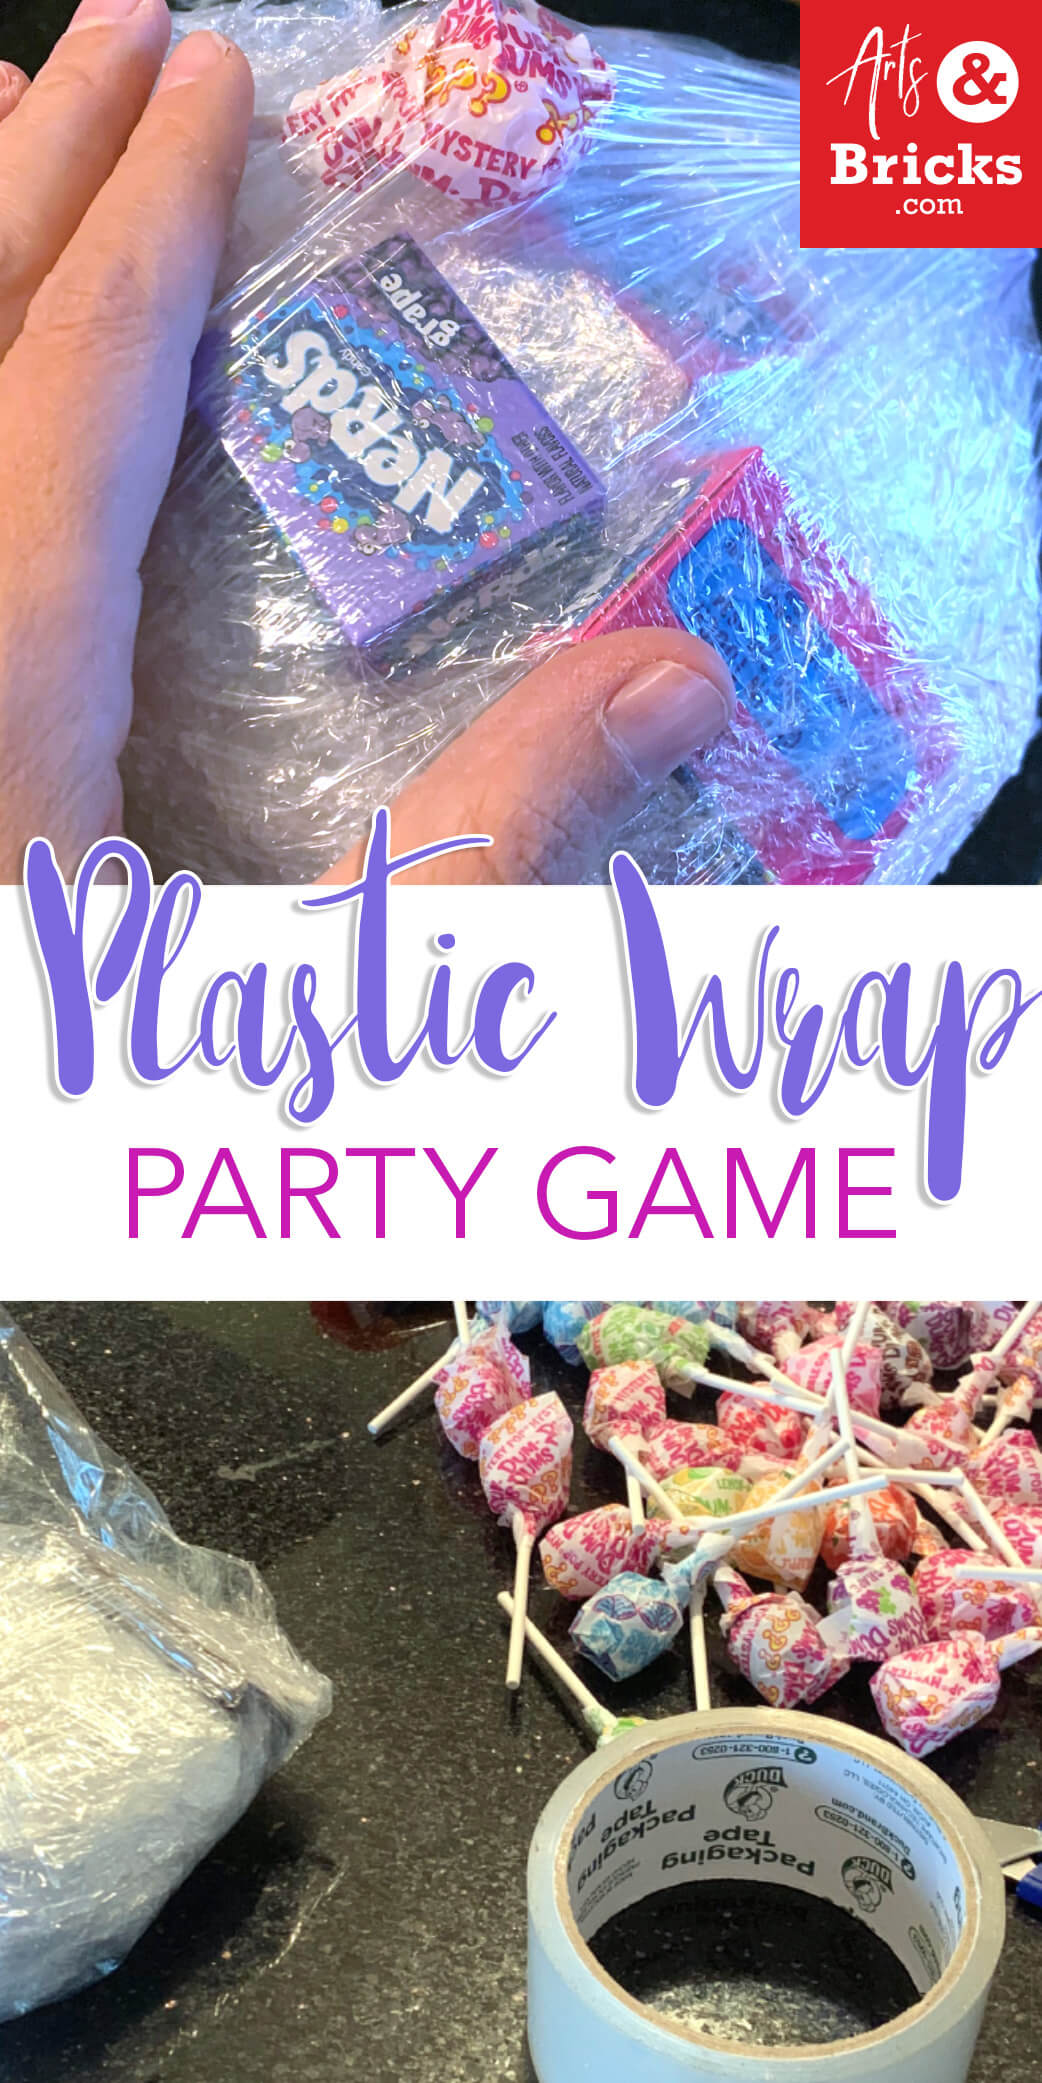 Saran Wrap Candy Ball Game for Holiday School Parties - Arts and Bricks